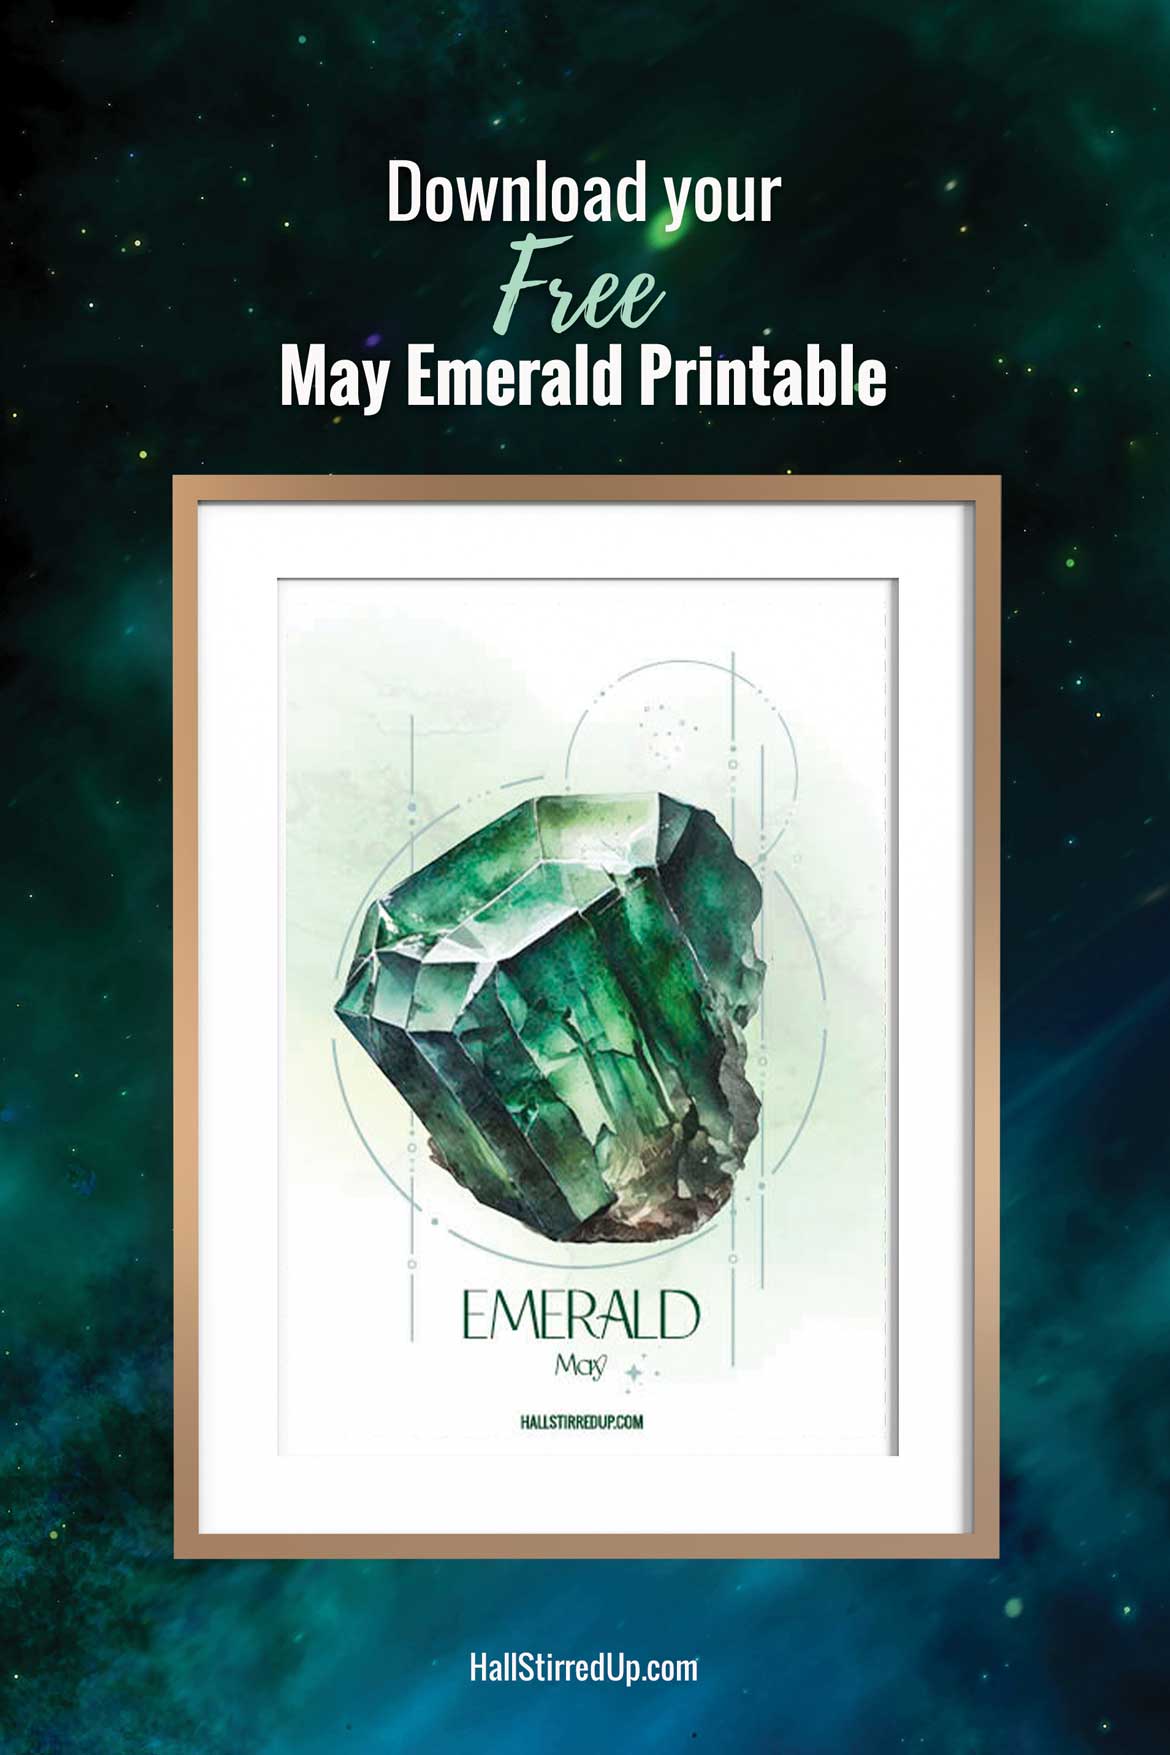 Elegant Emerald is May's Birthstone! Includes printable